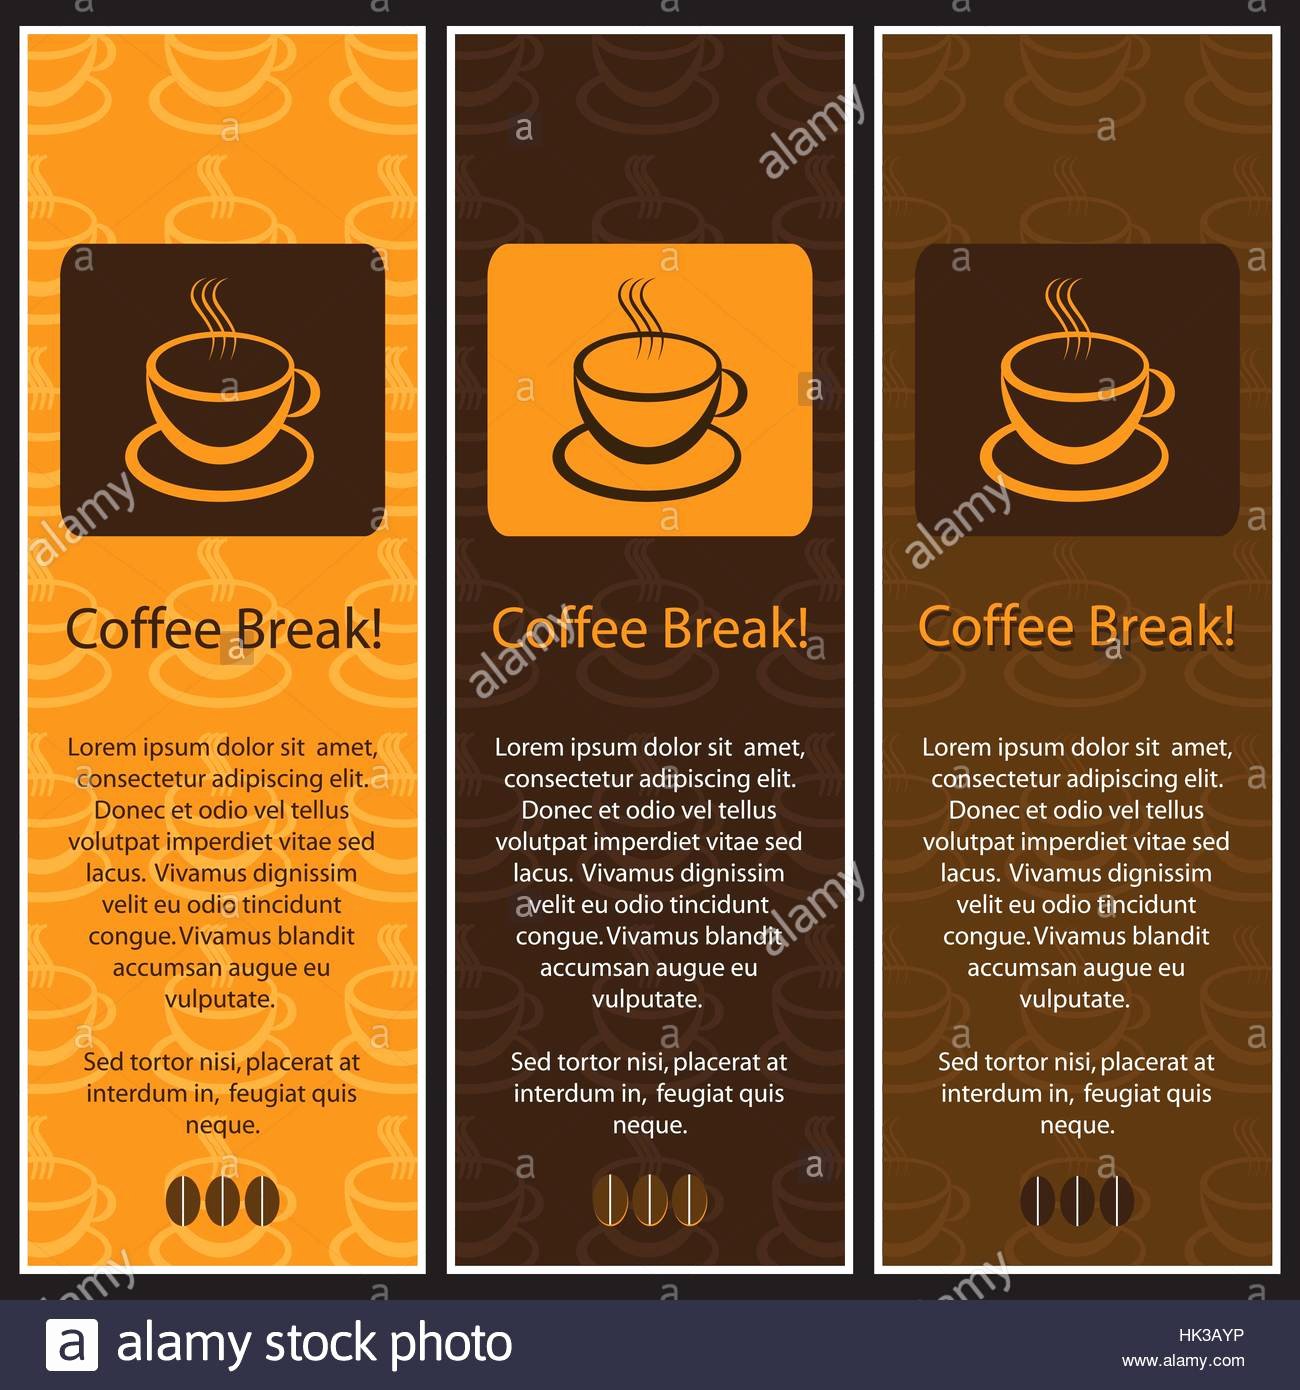 Coffee Shop Menu Template Lovely Set Of 3 Coffee Shop Banner or Menu Template Designs Stock